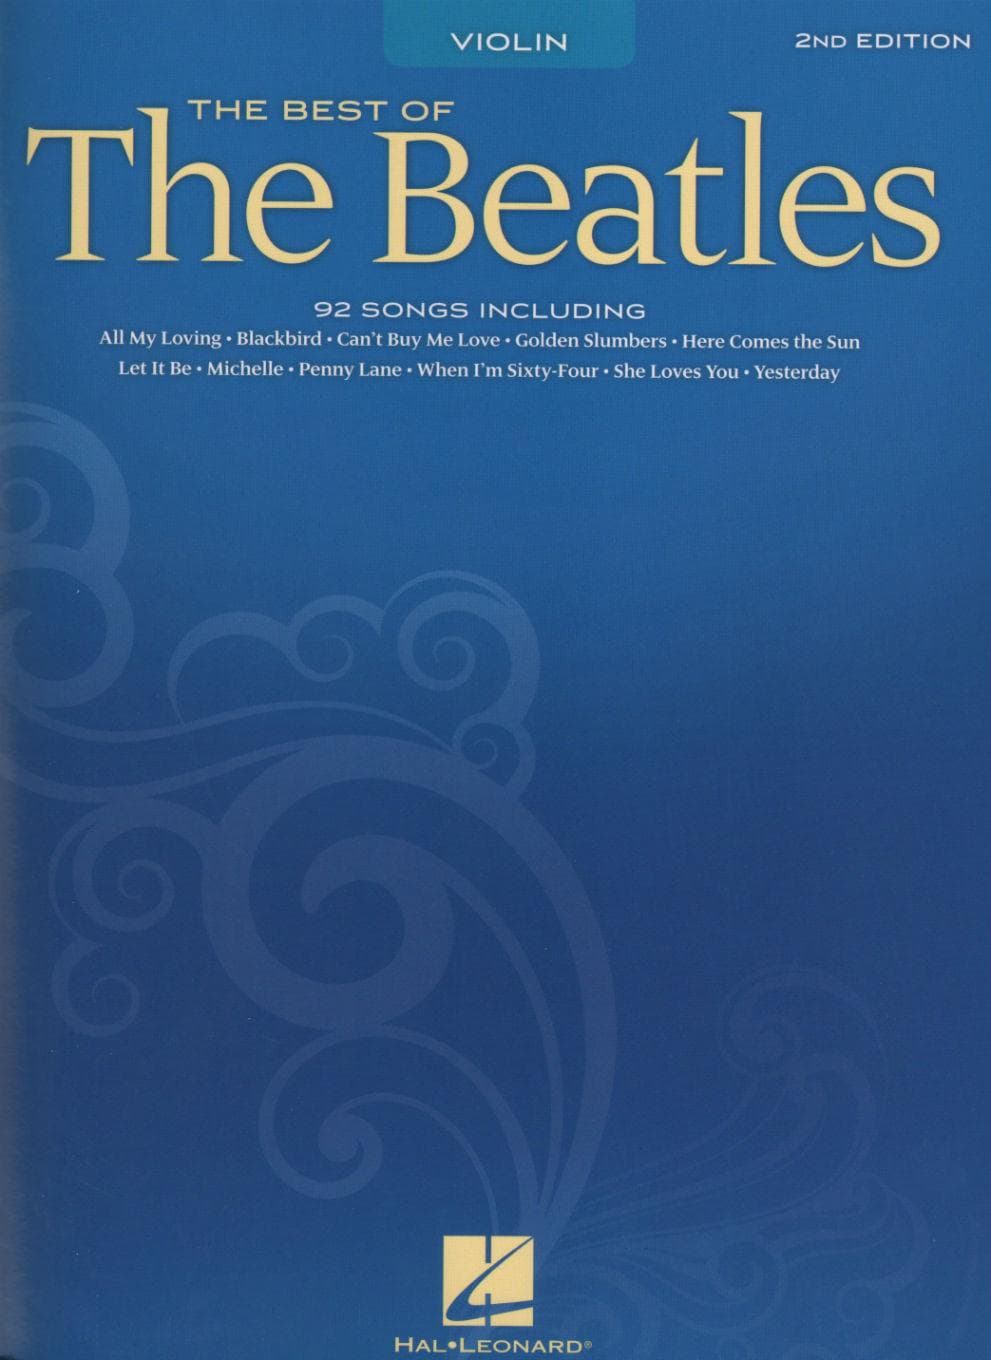 The Best of the Beatles: 89 Songs - Violin solo - Hal Leonard Publication